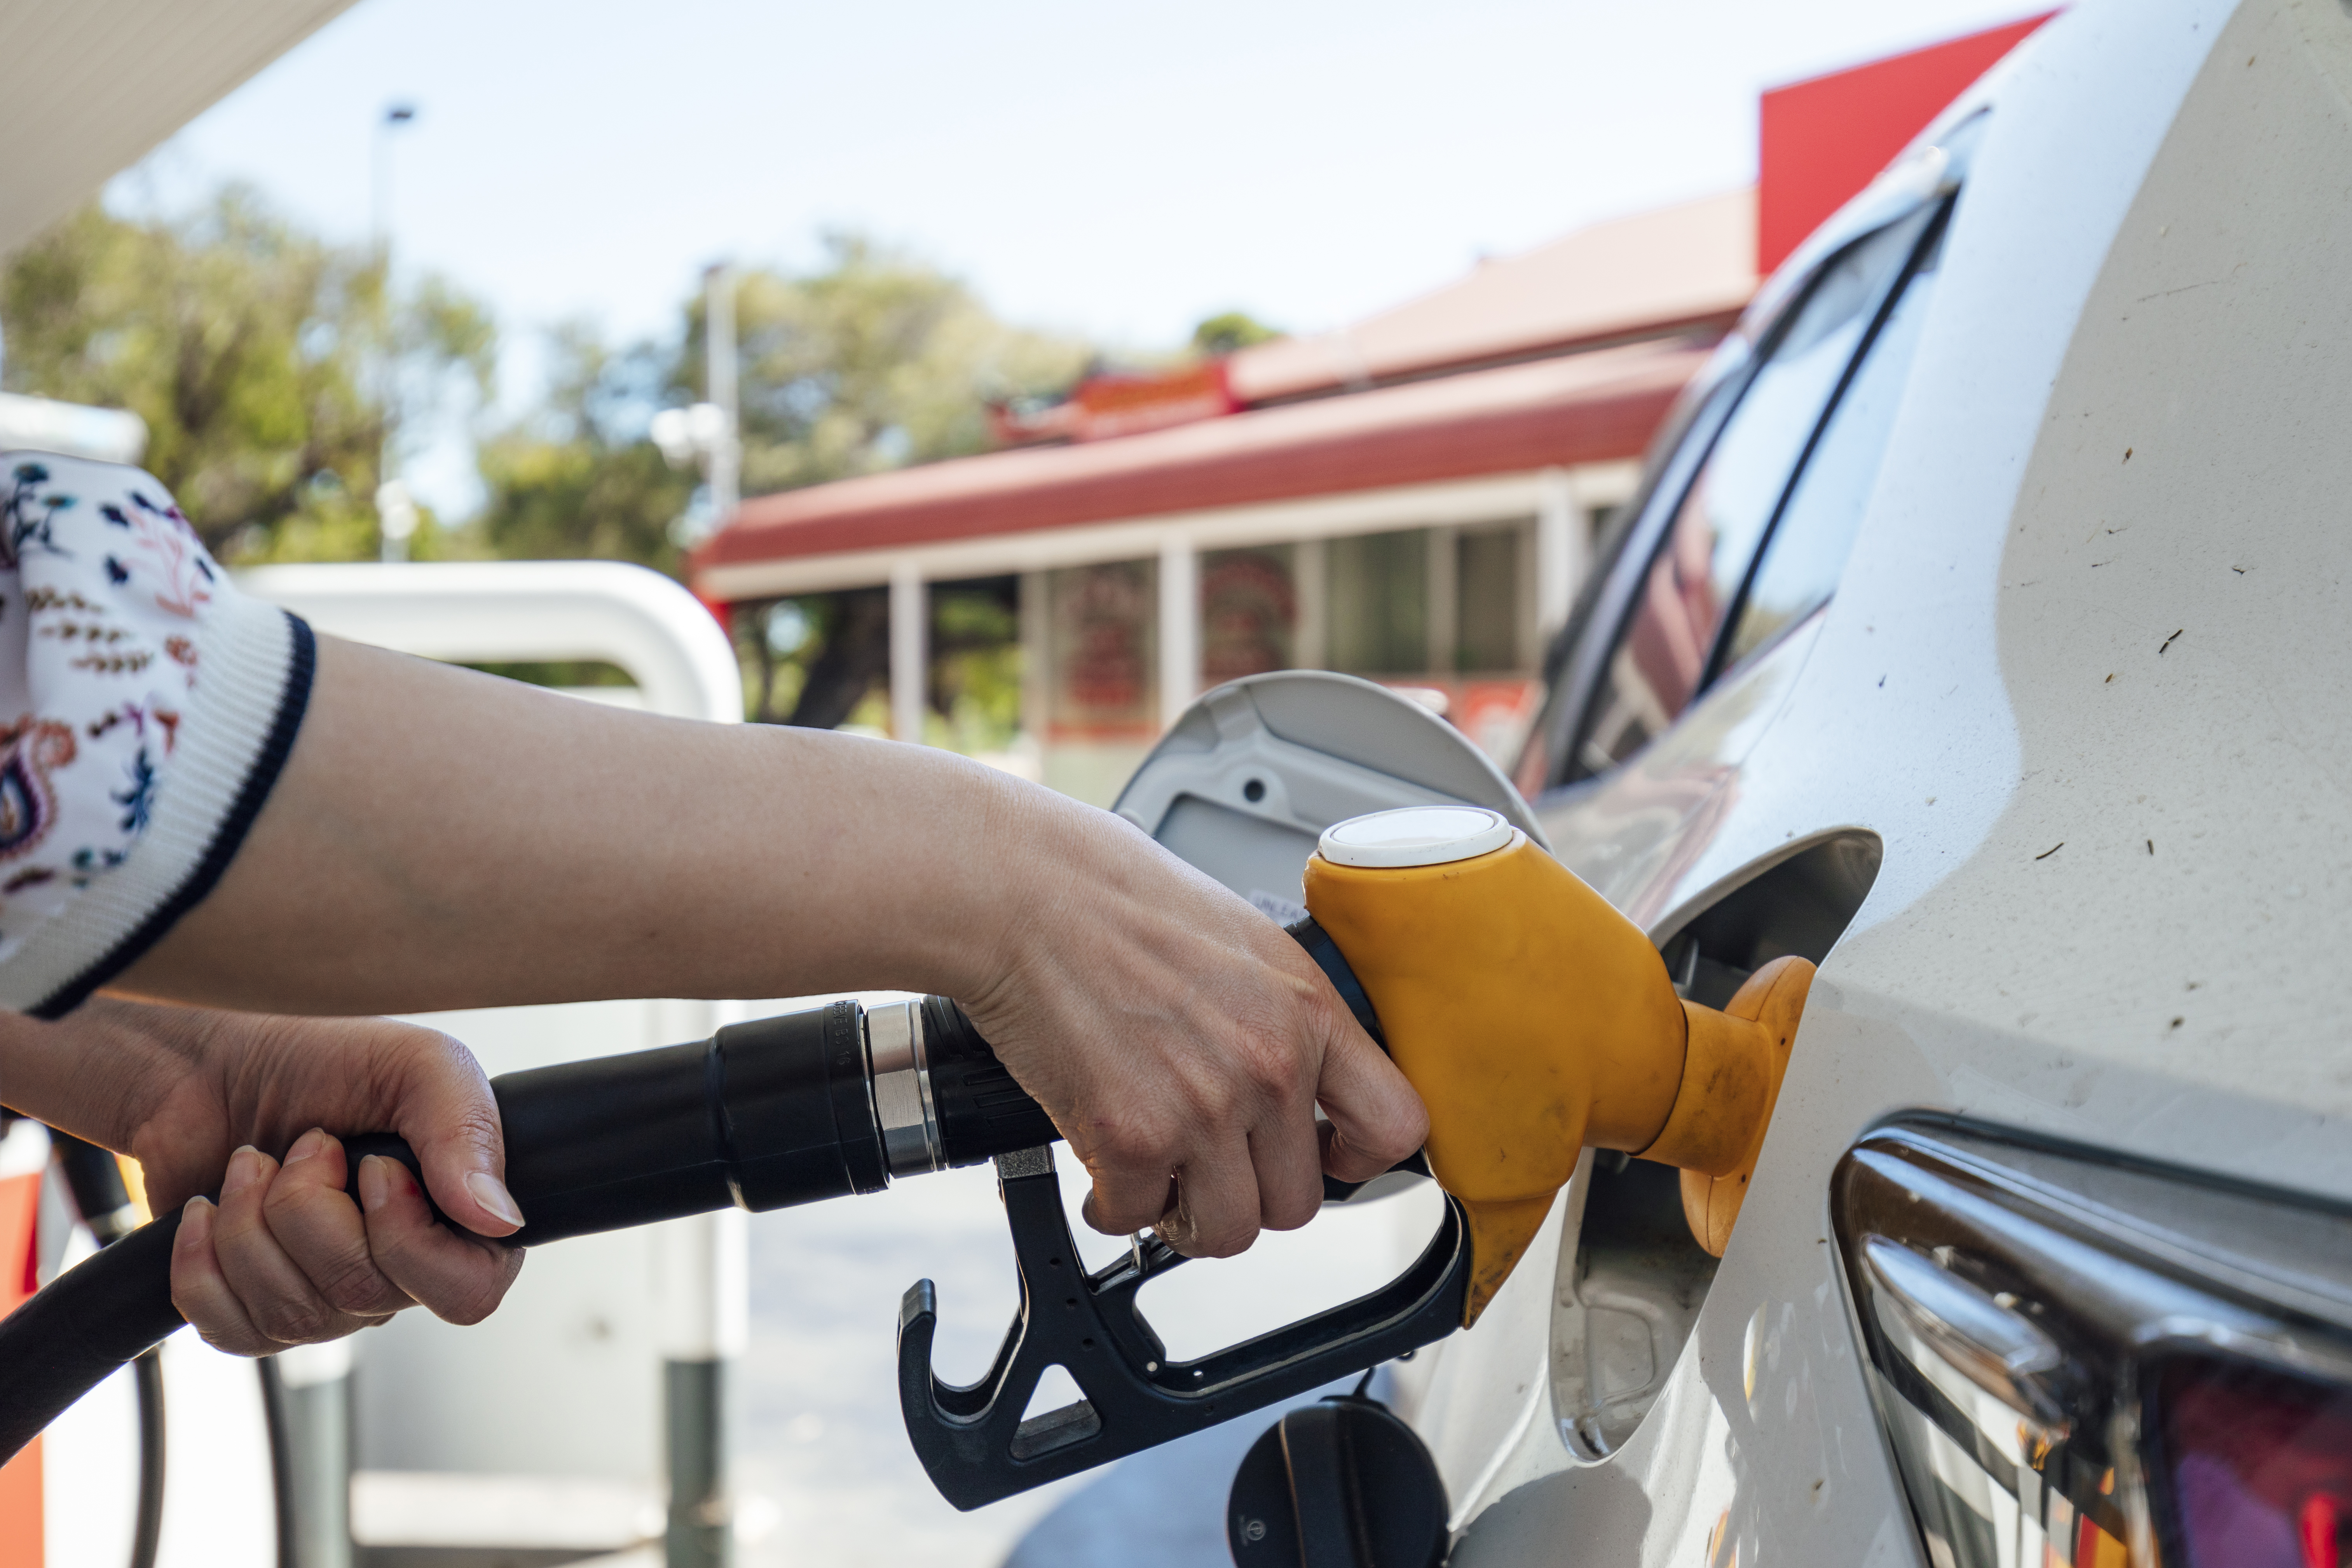 Image of woman's hand pumping petrol